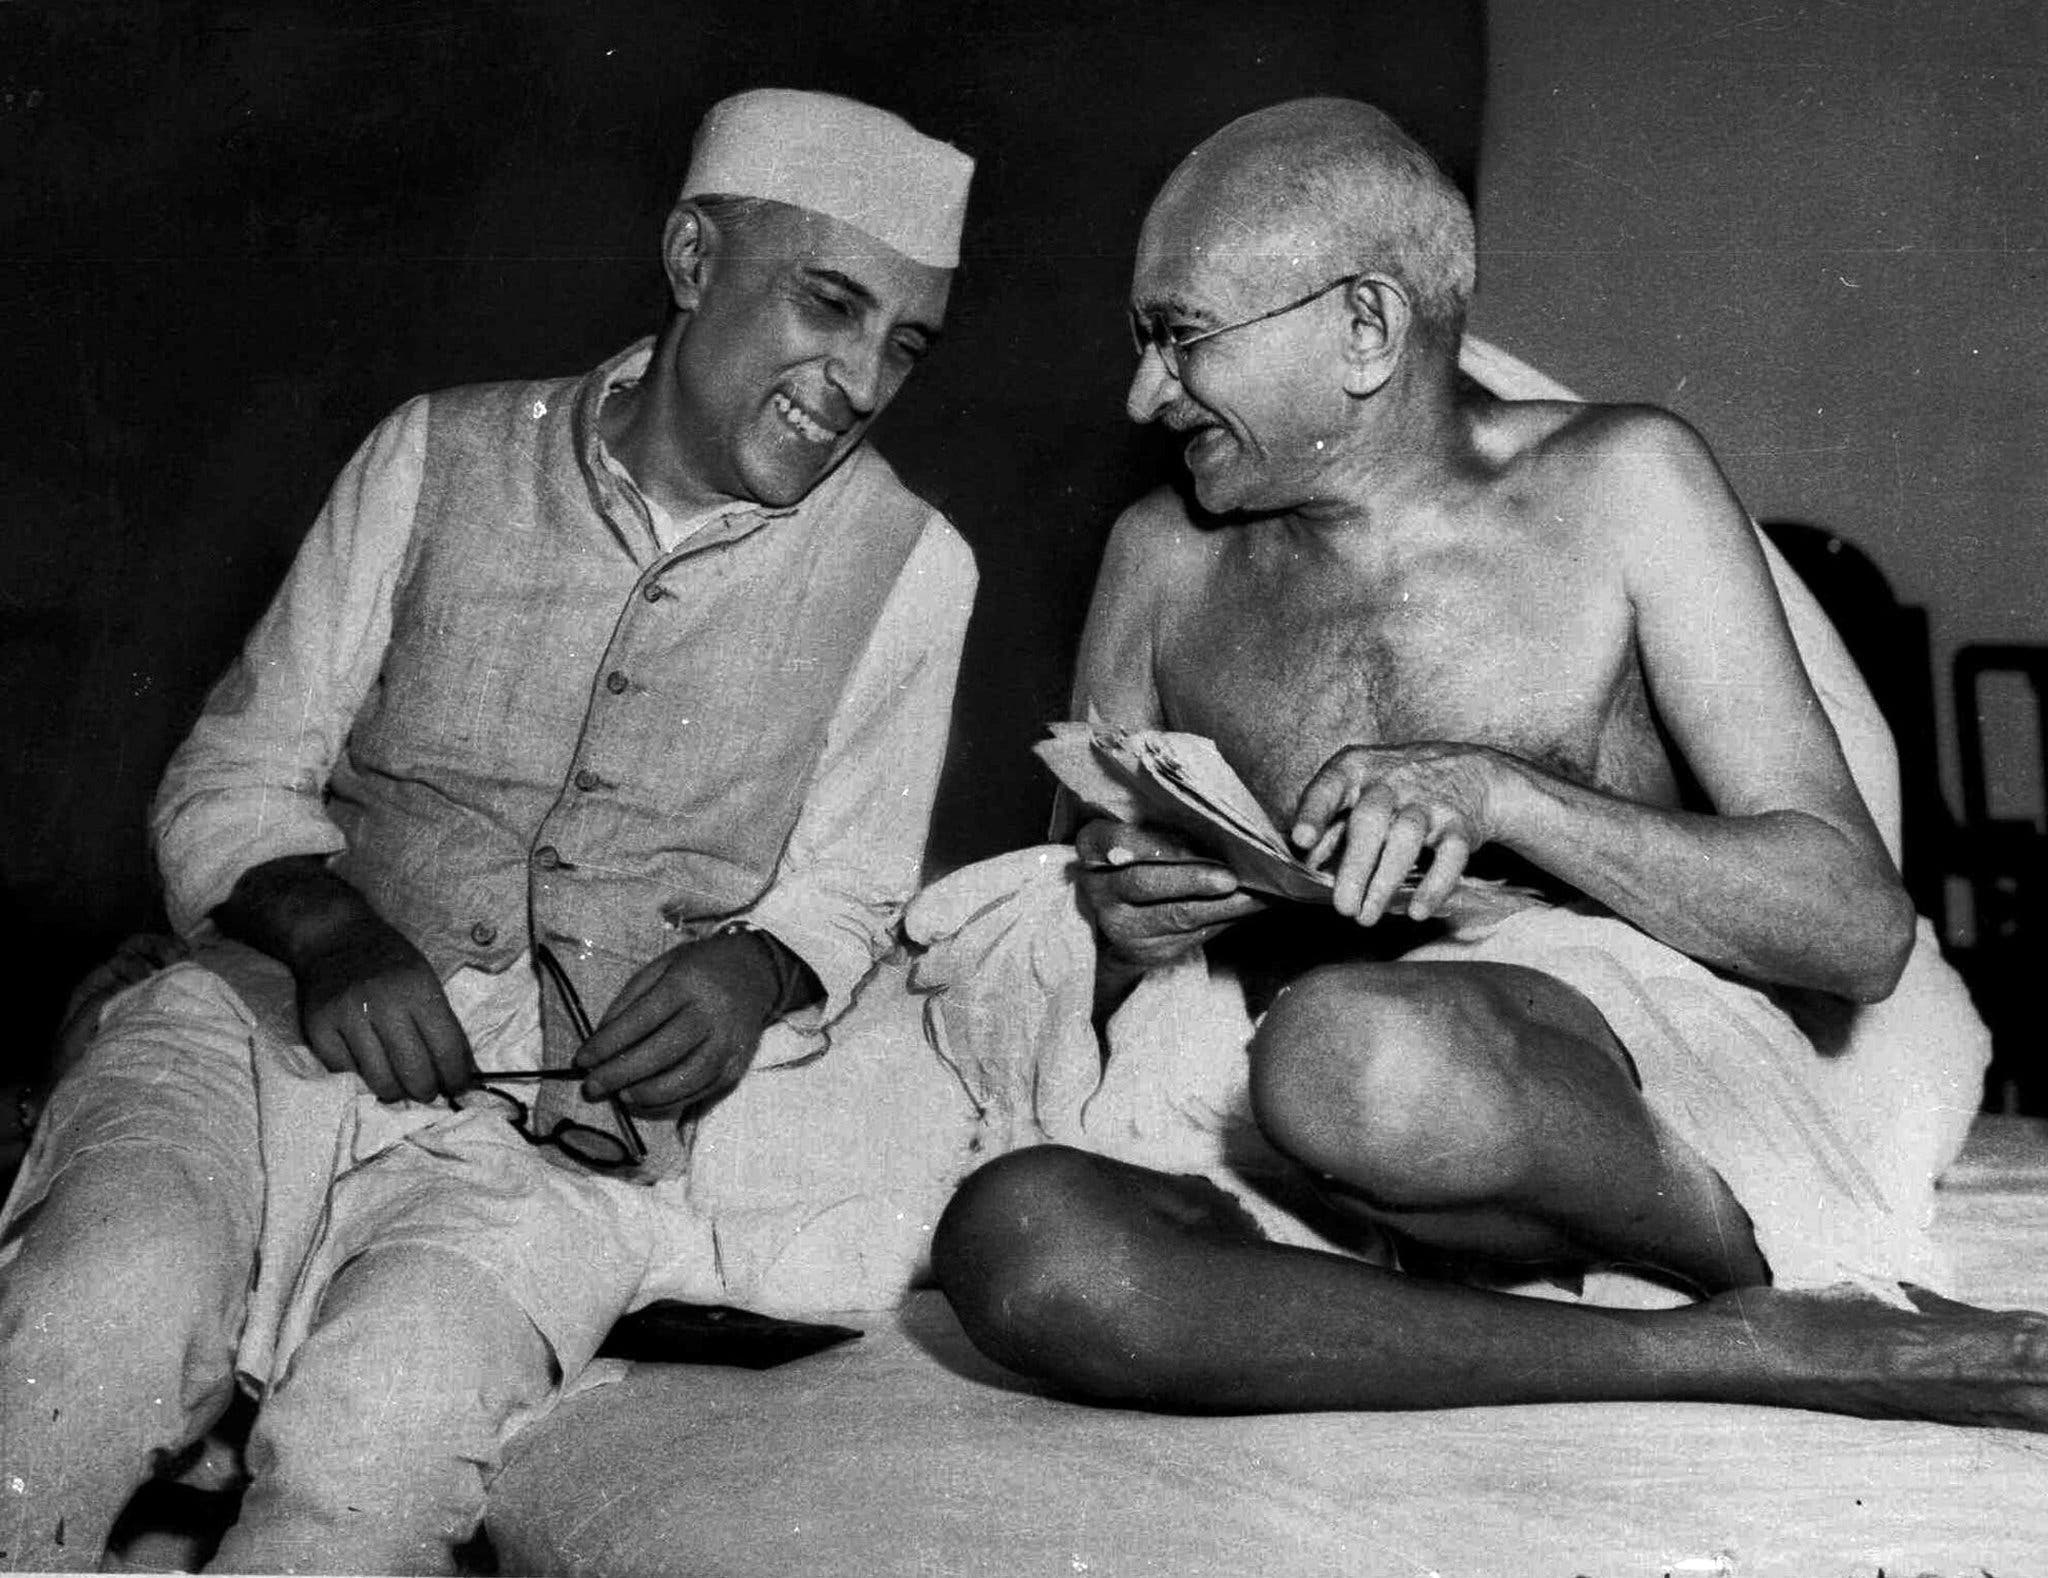 Left to right:  Pandit Jawaharlal Nehru, 14 November 1889 – 27 May 1964) was an Indian independence activist, and subsequently, the first Prime Minister of India and a central figure in Indian politics before and after independence.  Mohandas Karamchand Gandhi,  2 October 1869 – 30 January 1948) was an Indian lawyer, anti-colonial nationalist, and political ethicist, who employed nonviolent resistance to lead the successful campaign for India's independence from British Rule, and in turn inspire movements for civil rights and freedom across the world.-James Wilson